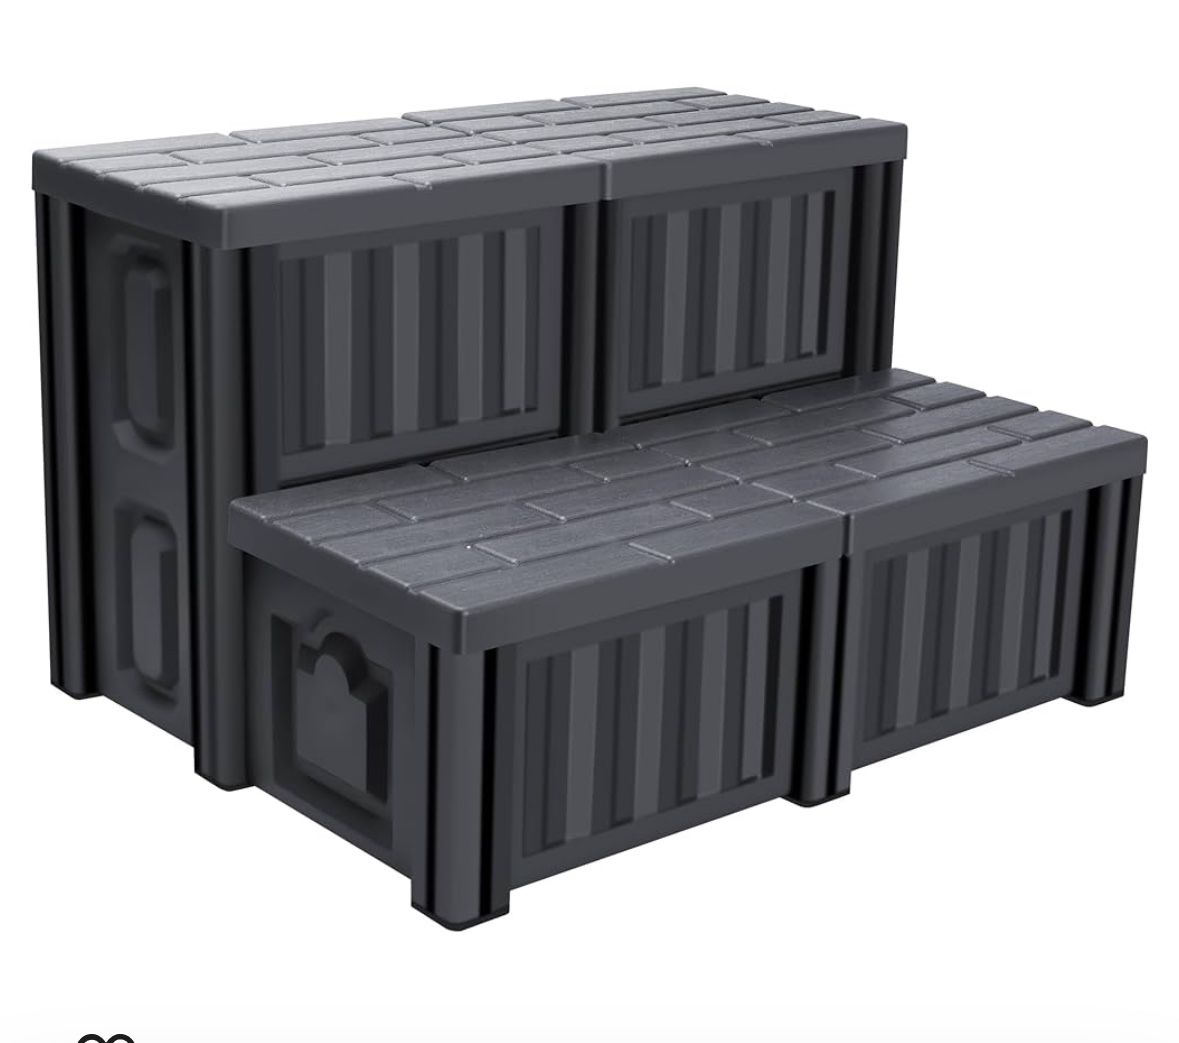 Hot Tub Steps with Storage - Heavy Duty Sturdiness Hot Tub Stairs Spa Steps for Outside Outdoor, Non Slip PP Plastic, Fast & Easy Install - Upgrade Mu